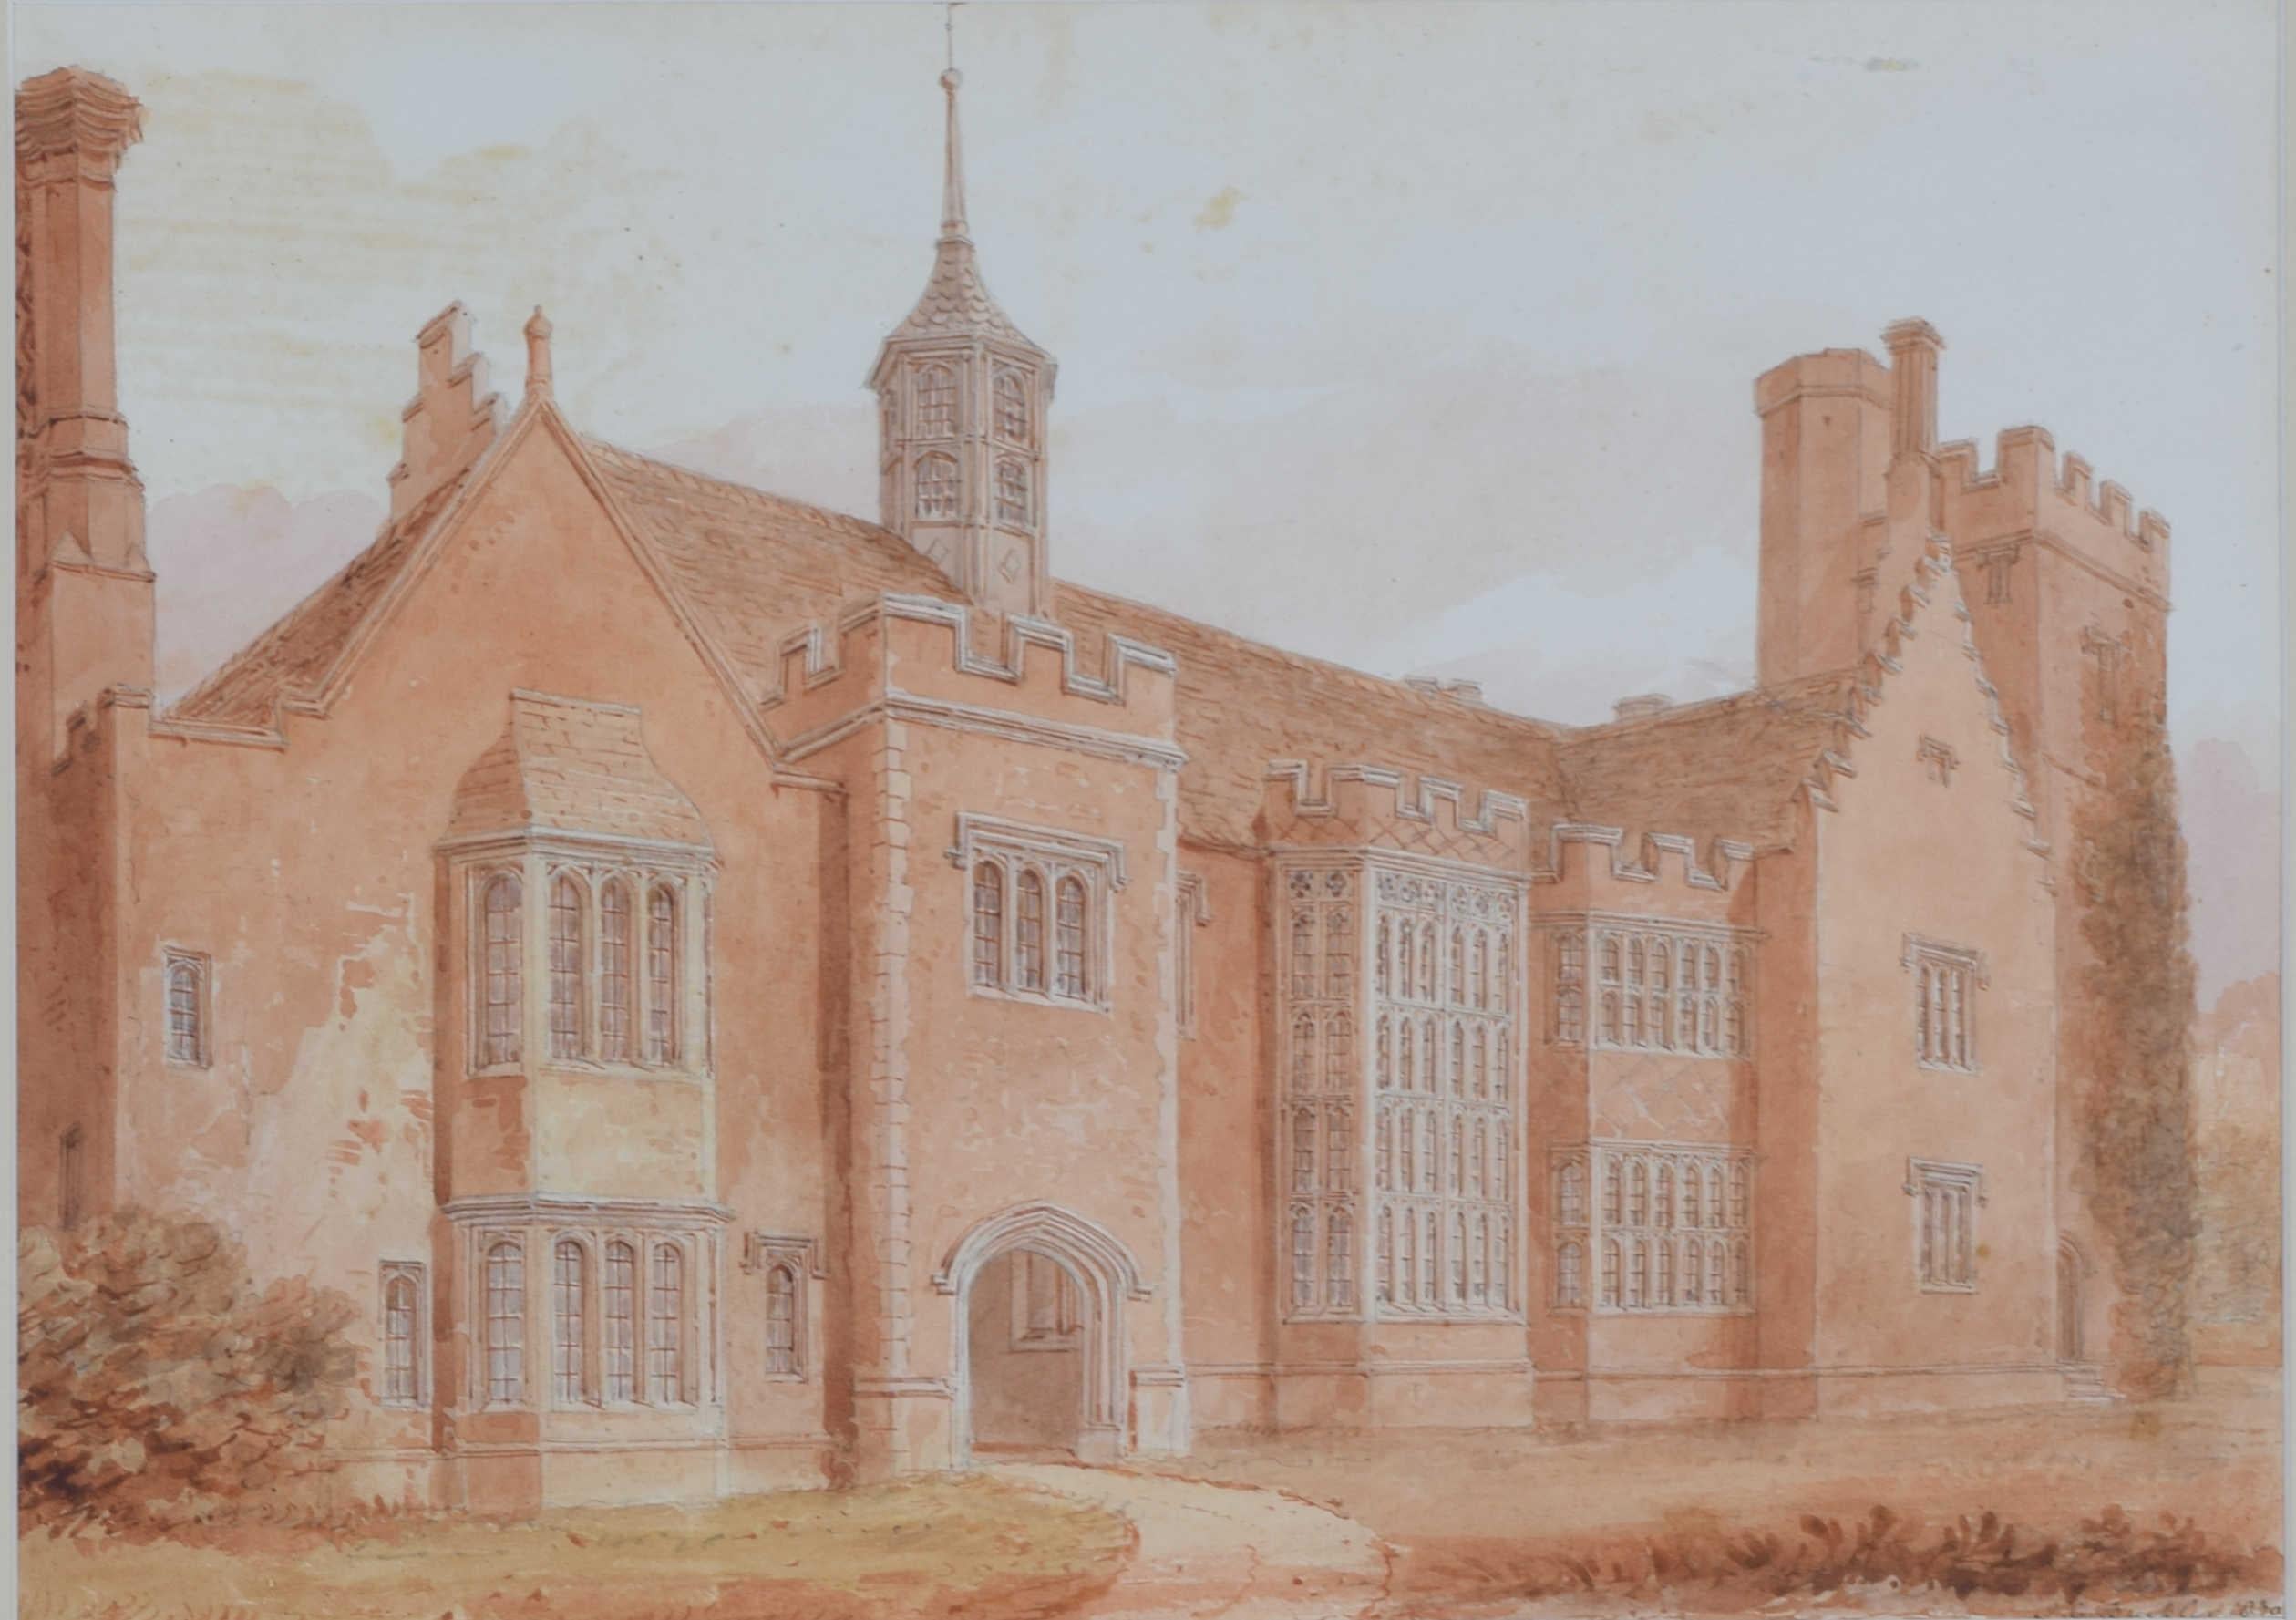 To see our other views and maps of England, scroll down to "More from this Seller" and below it click on "See all from this Seller" - or send us a message if you cannot find the view you want.

John Chessell Buckler (1793 - 1894)
Horham Hall, Essex